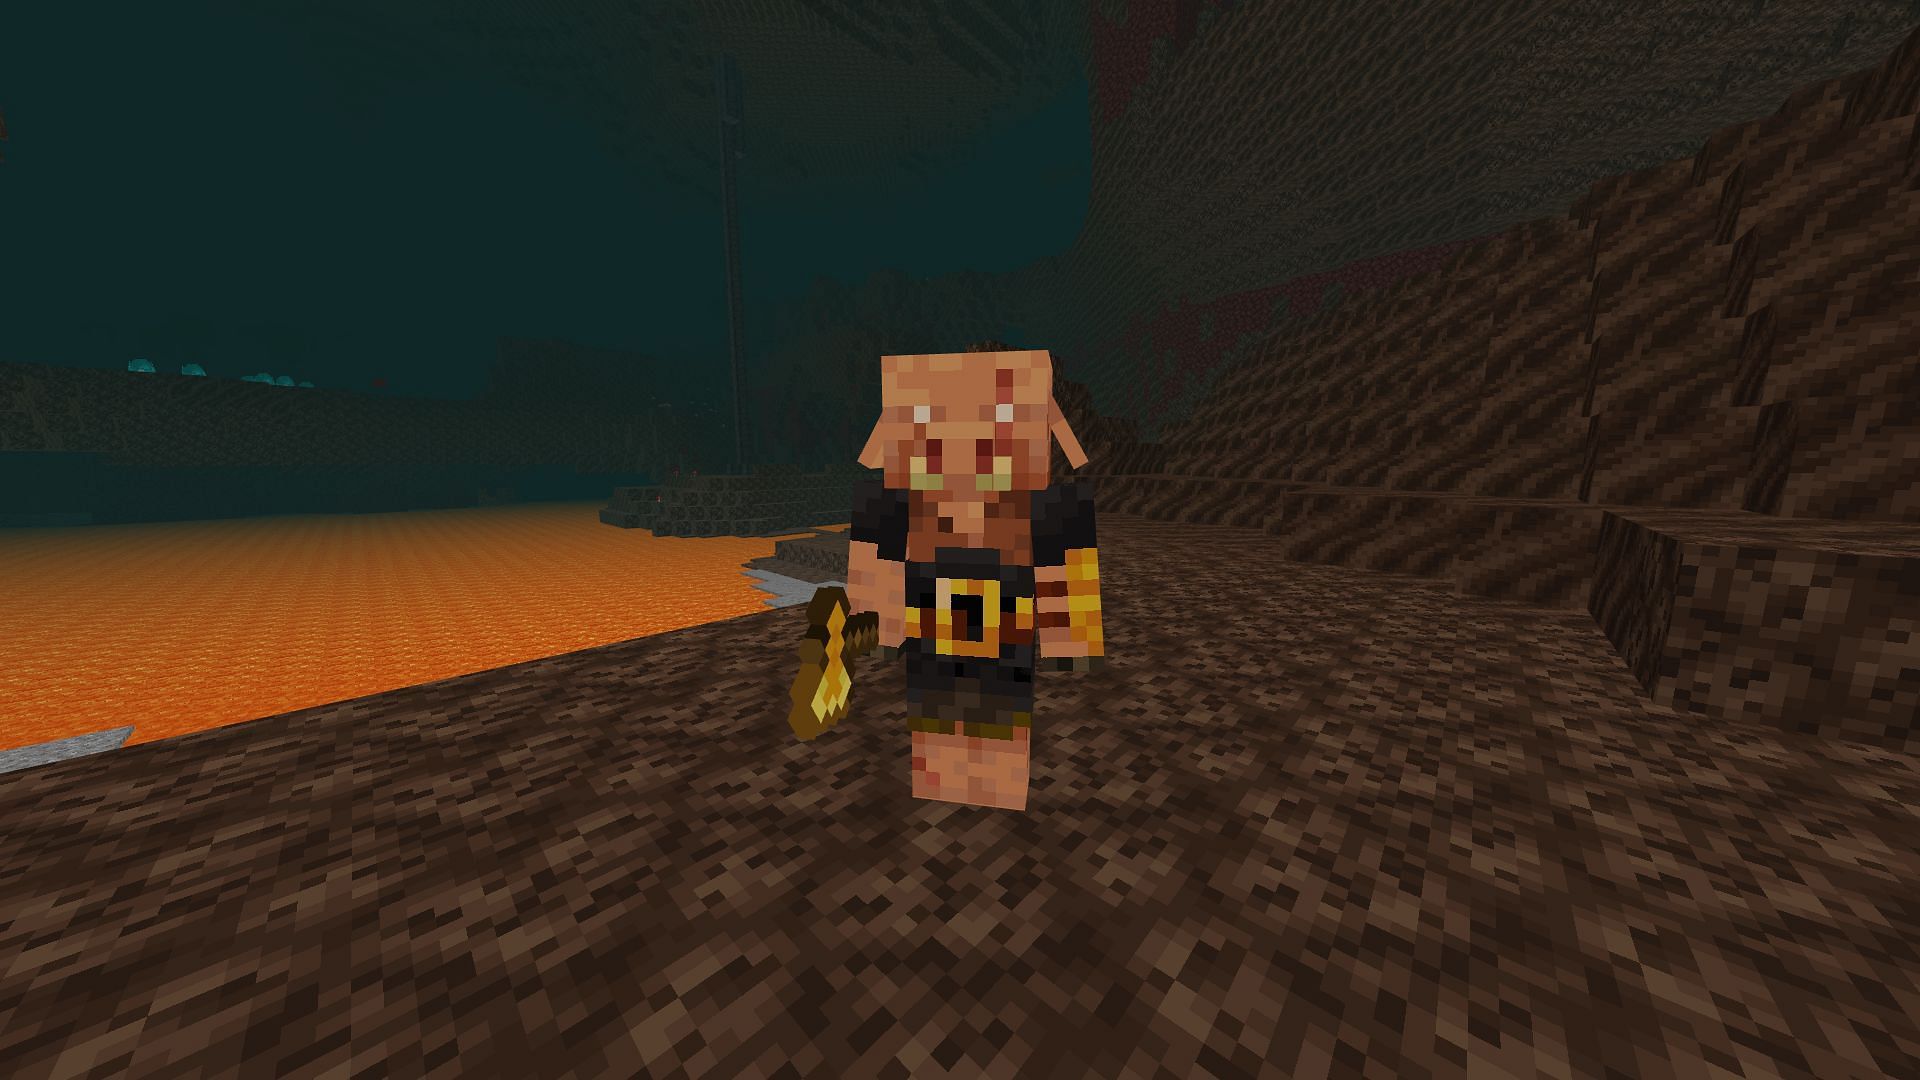 Piglin Brute has a golden axe that can deal a lot of damage in Minecraft (Image via Mojang)